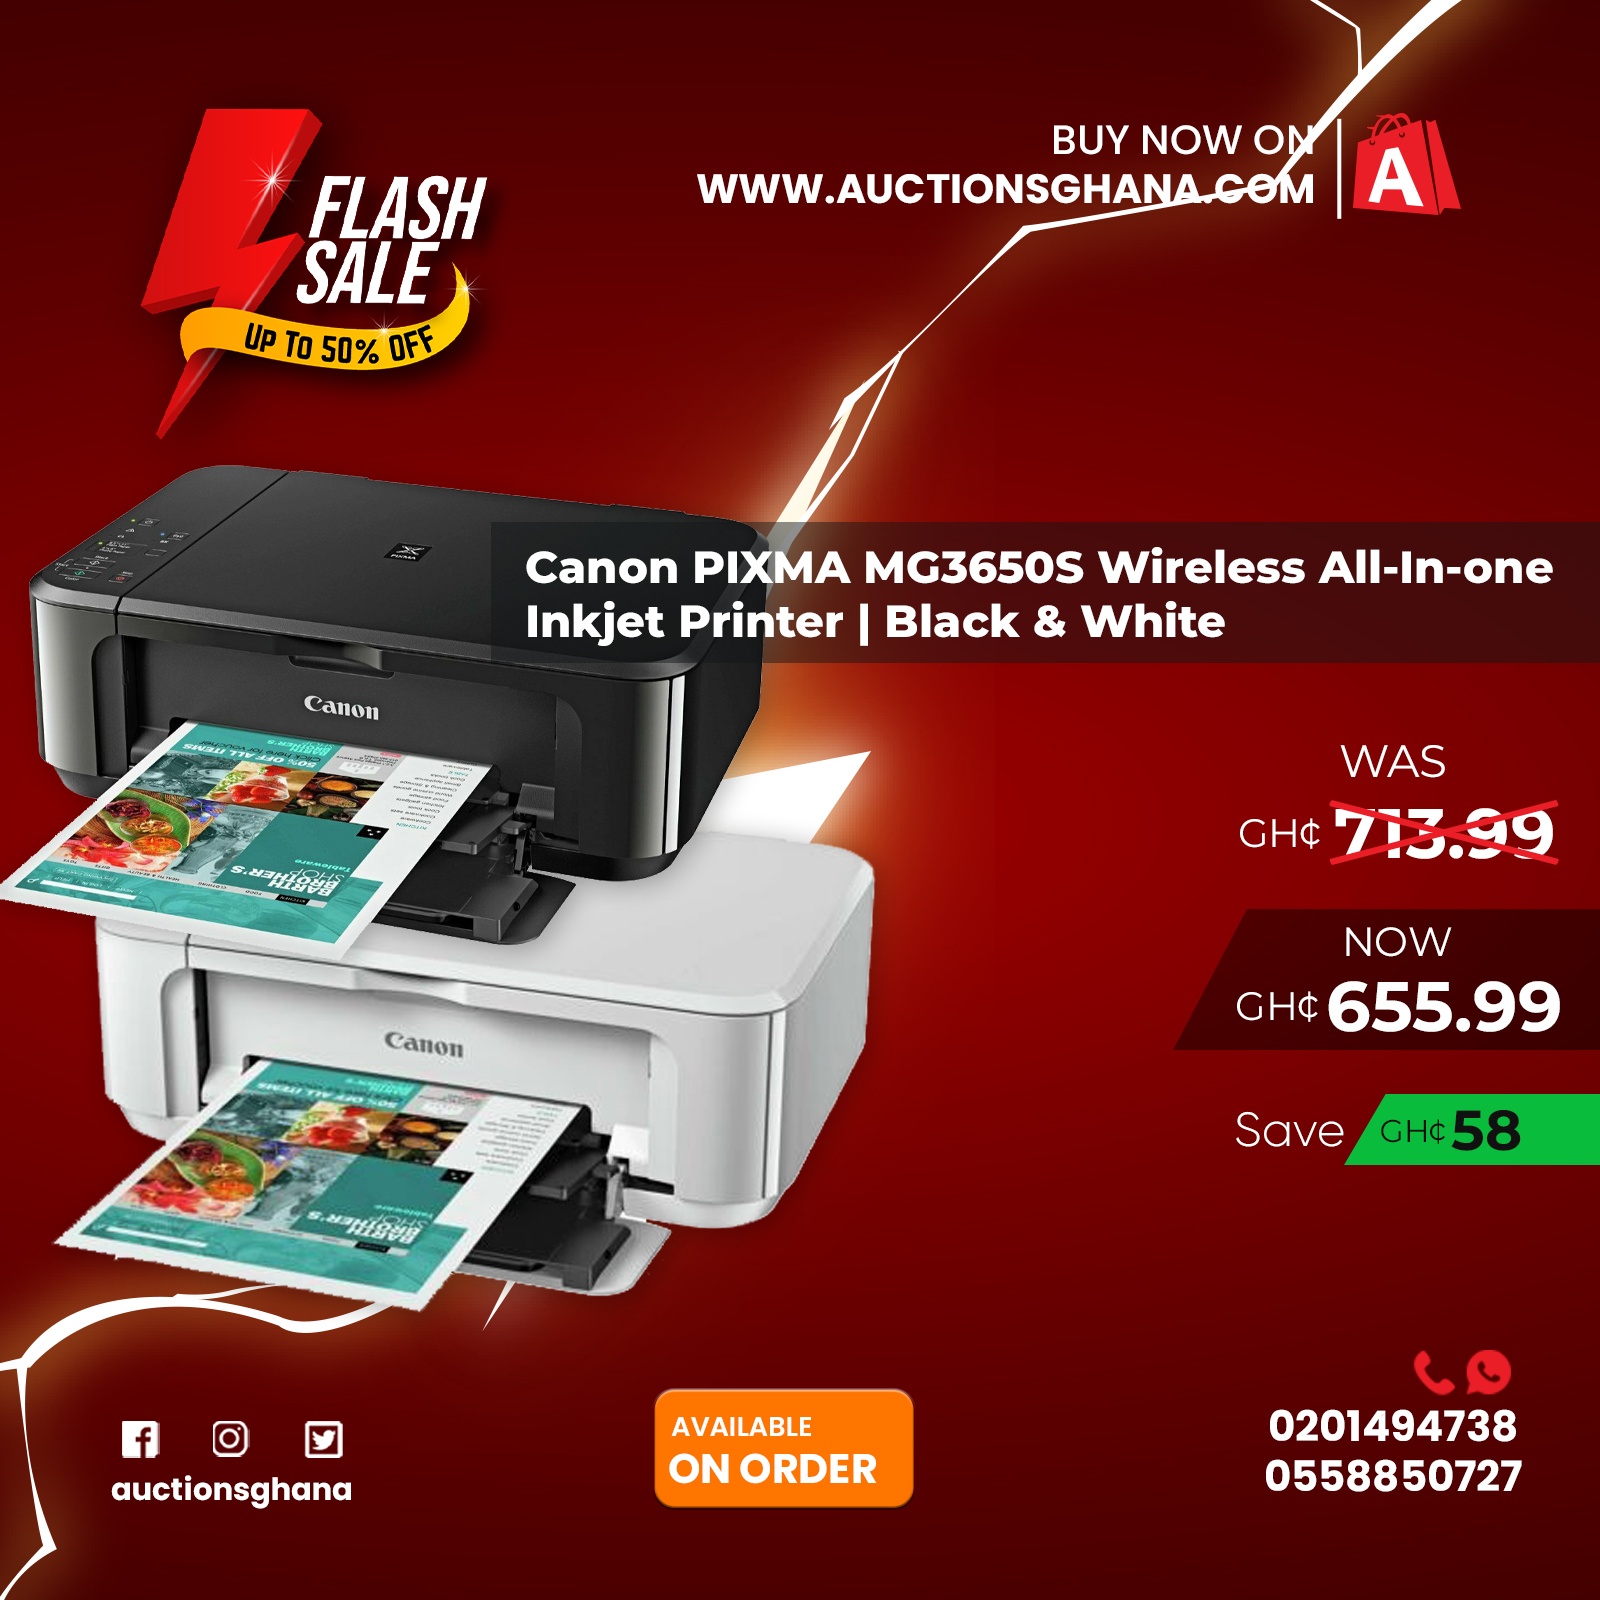 Canon MG3650S Inkjet Wireless All-in-One Printer